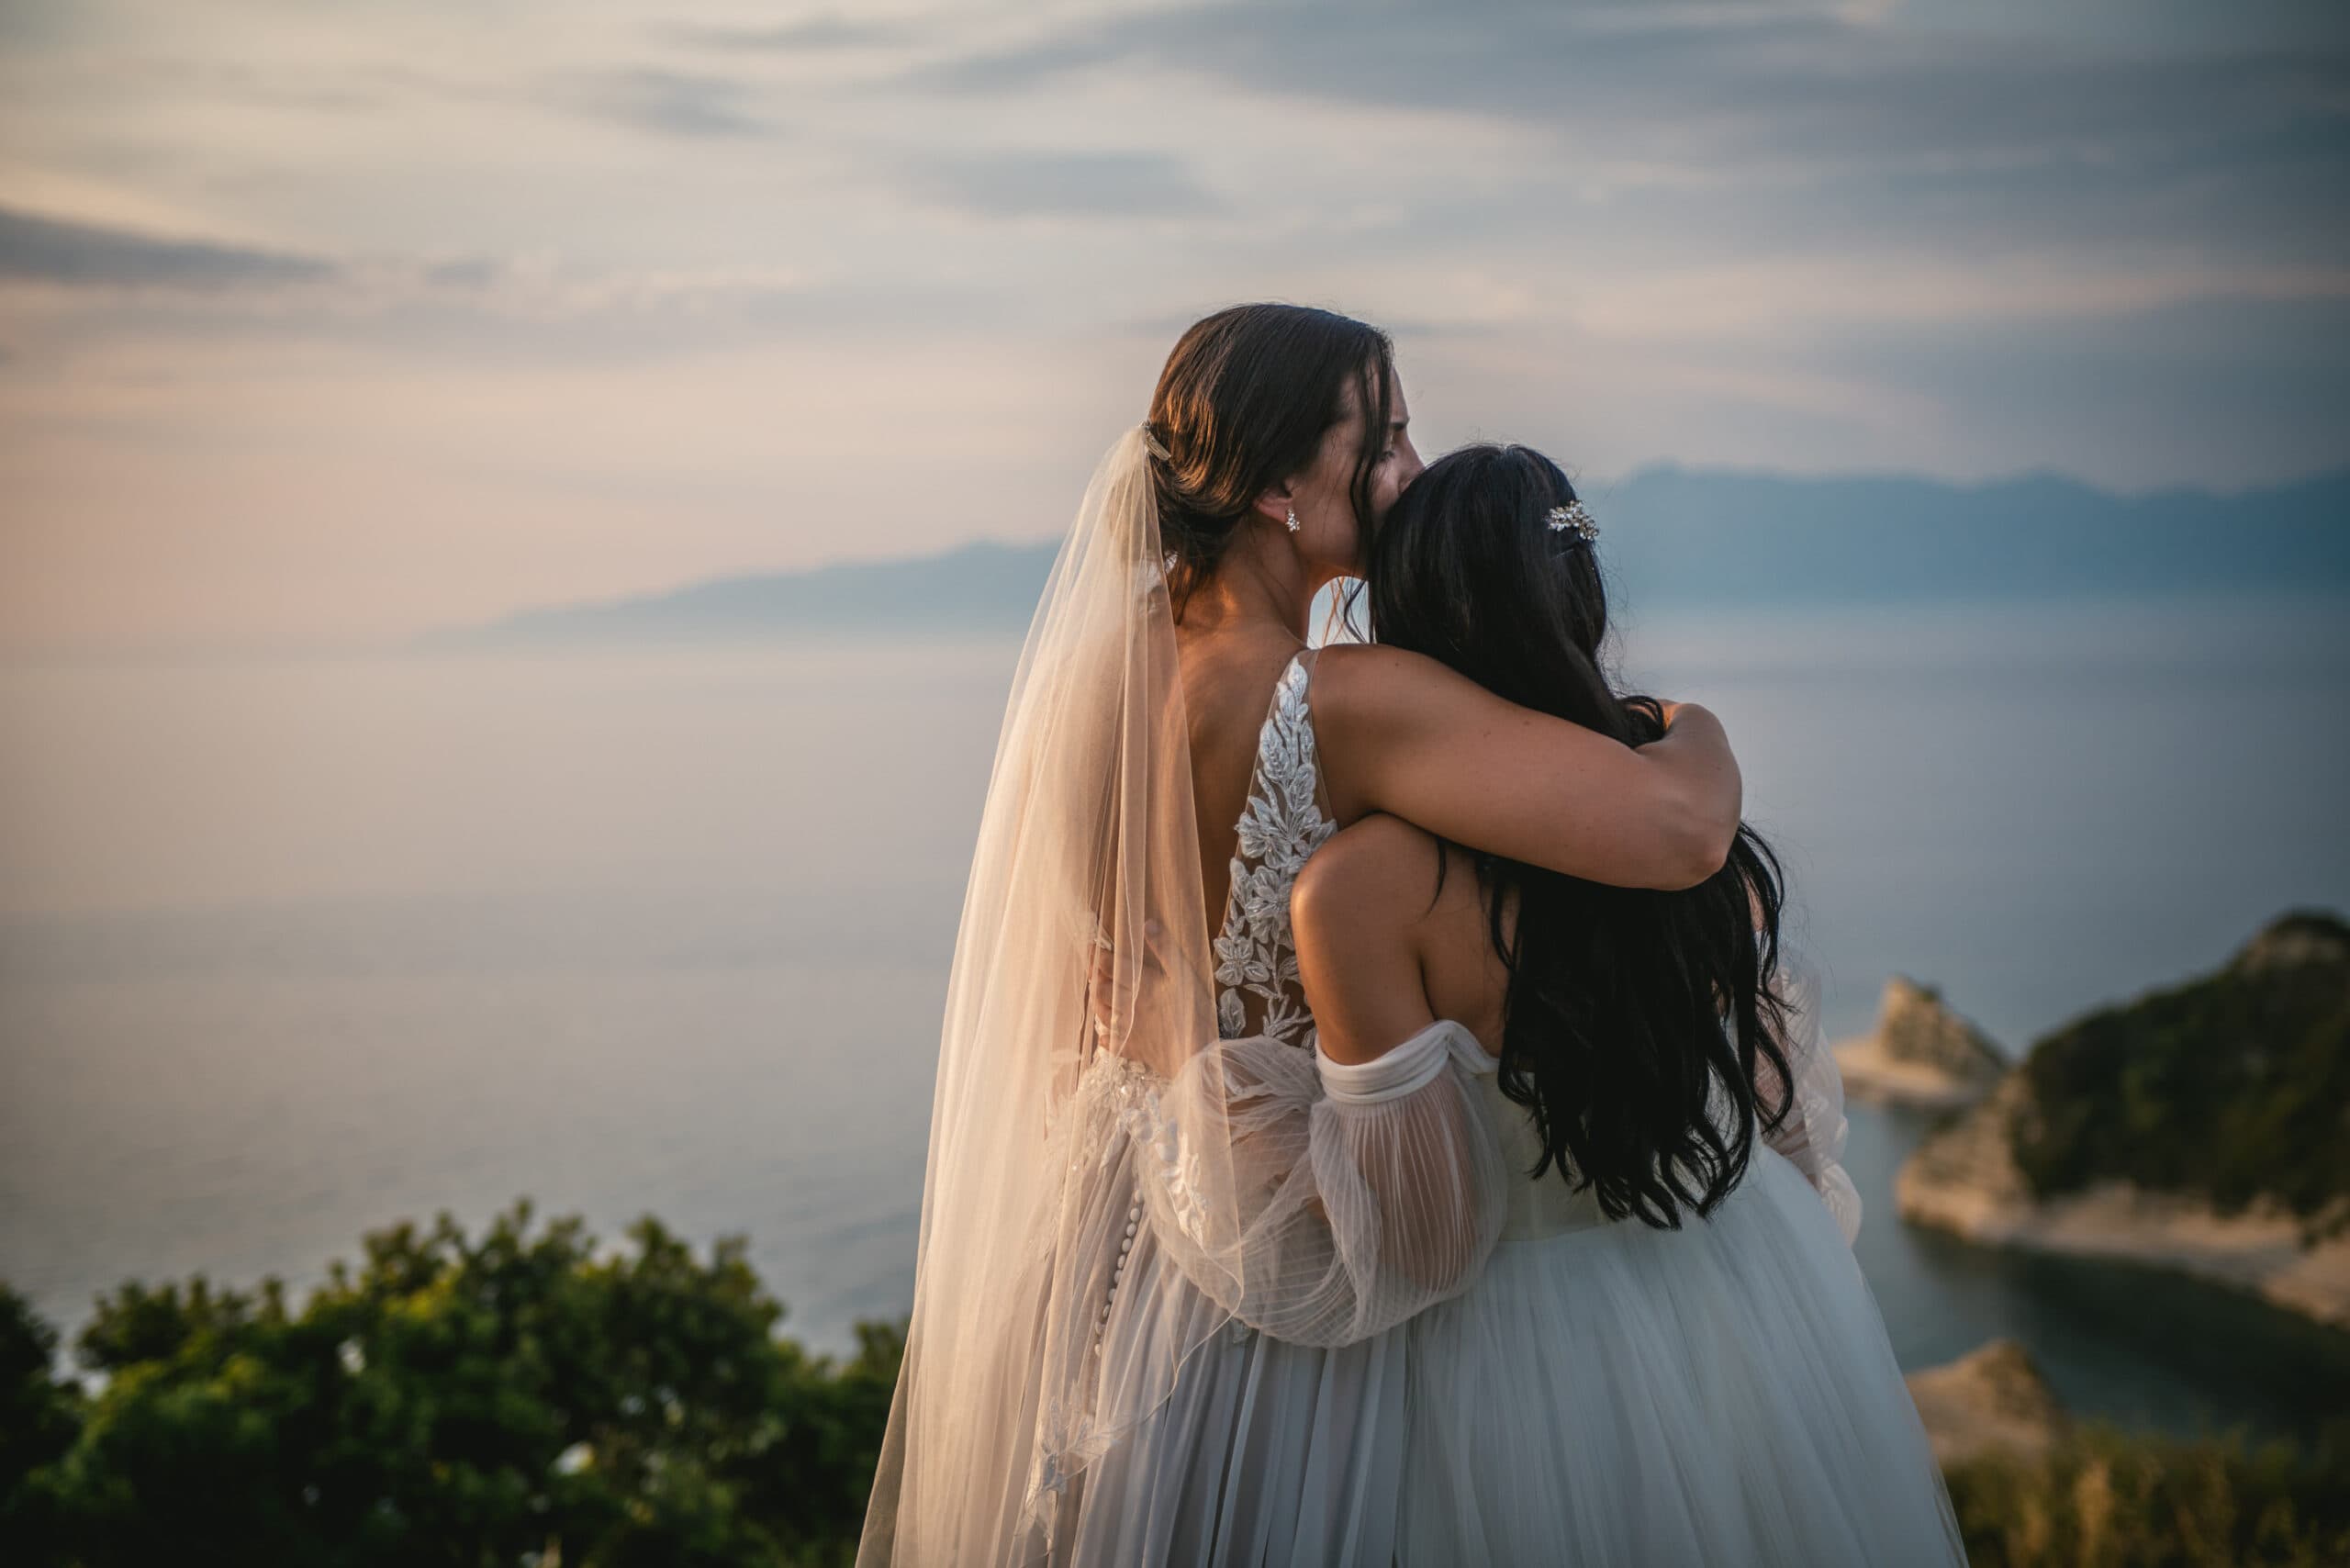 The couple's love story unfolds in the tender moments of their Corfu elopement ceremony.